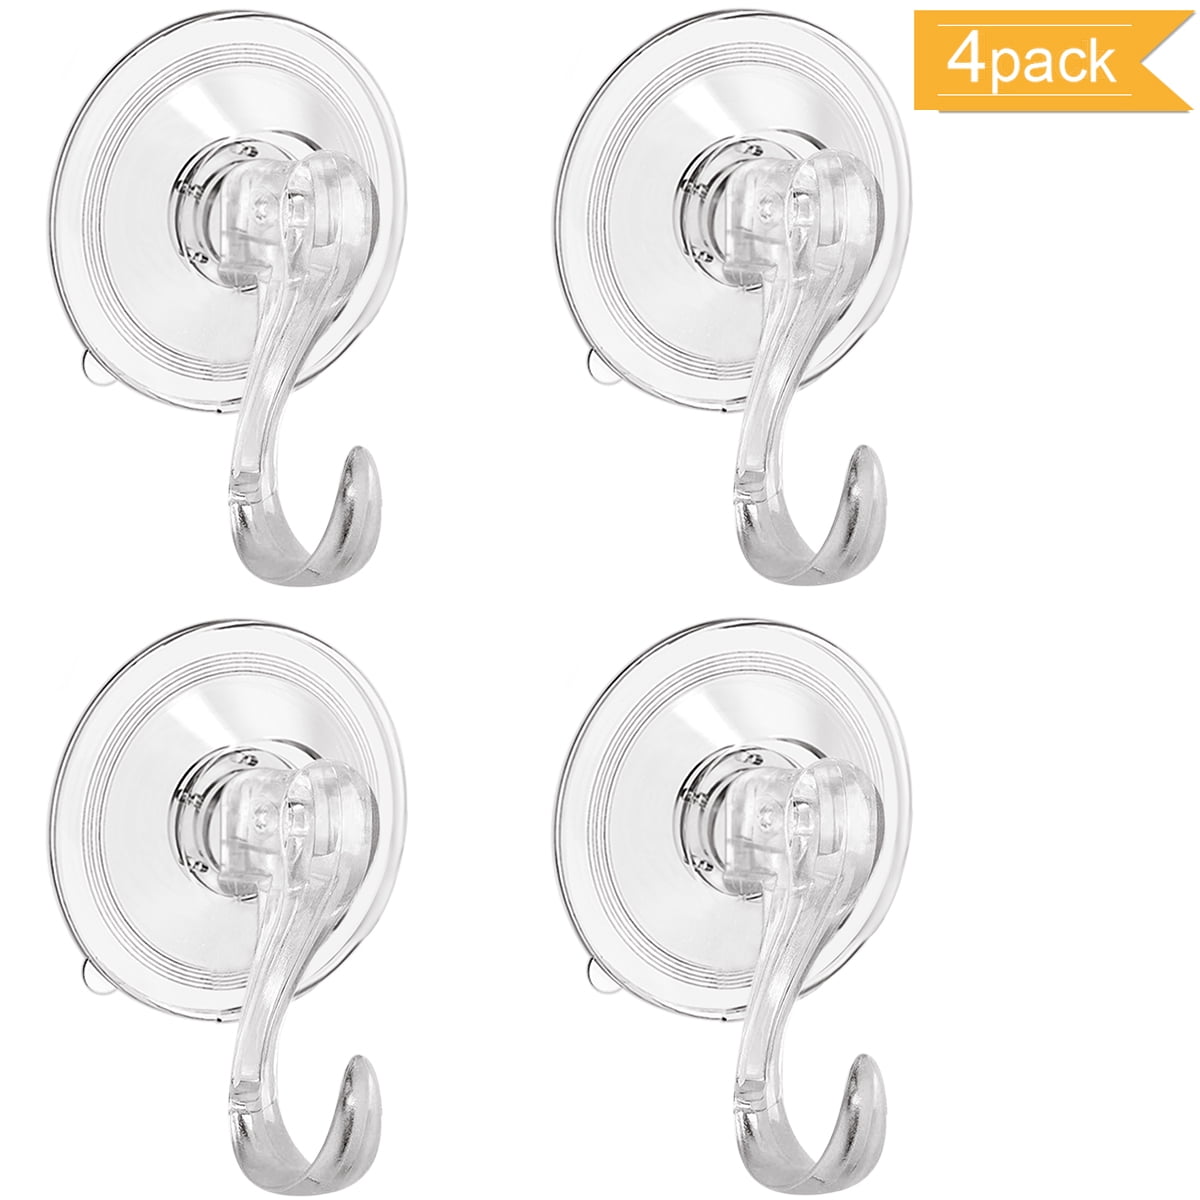 Suction Hooks No Drill Ulinek 4 Pack Suction Cup Hook Bathroom Kitchen Shower Wall Window Glass Door Sucker Hooks for Hanging Towel Coat Clothes Hanger Holder Heavy Duty Max 5KG